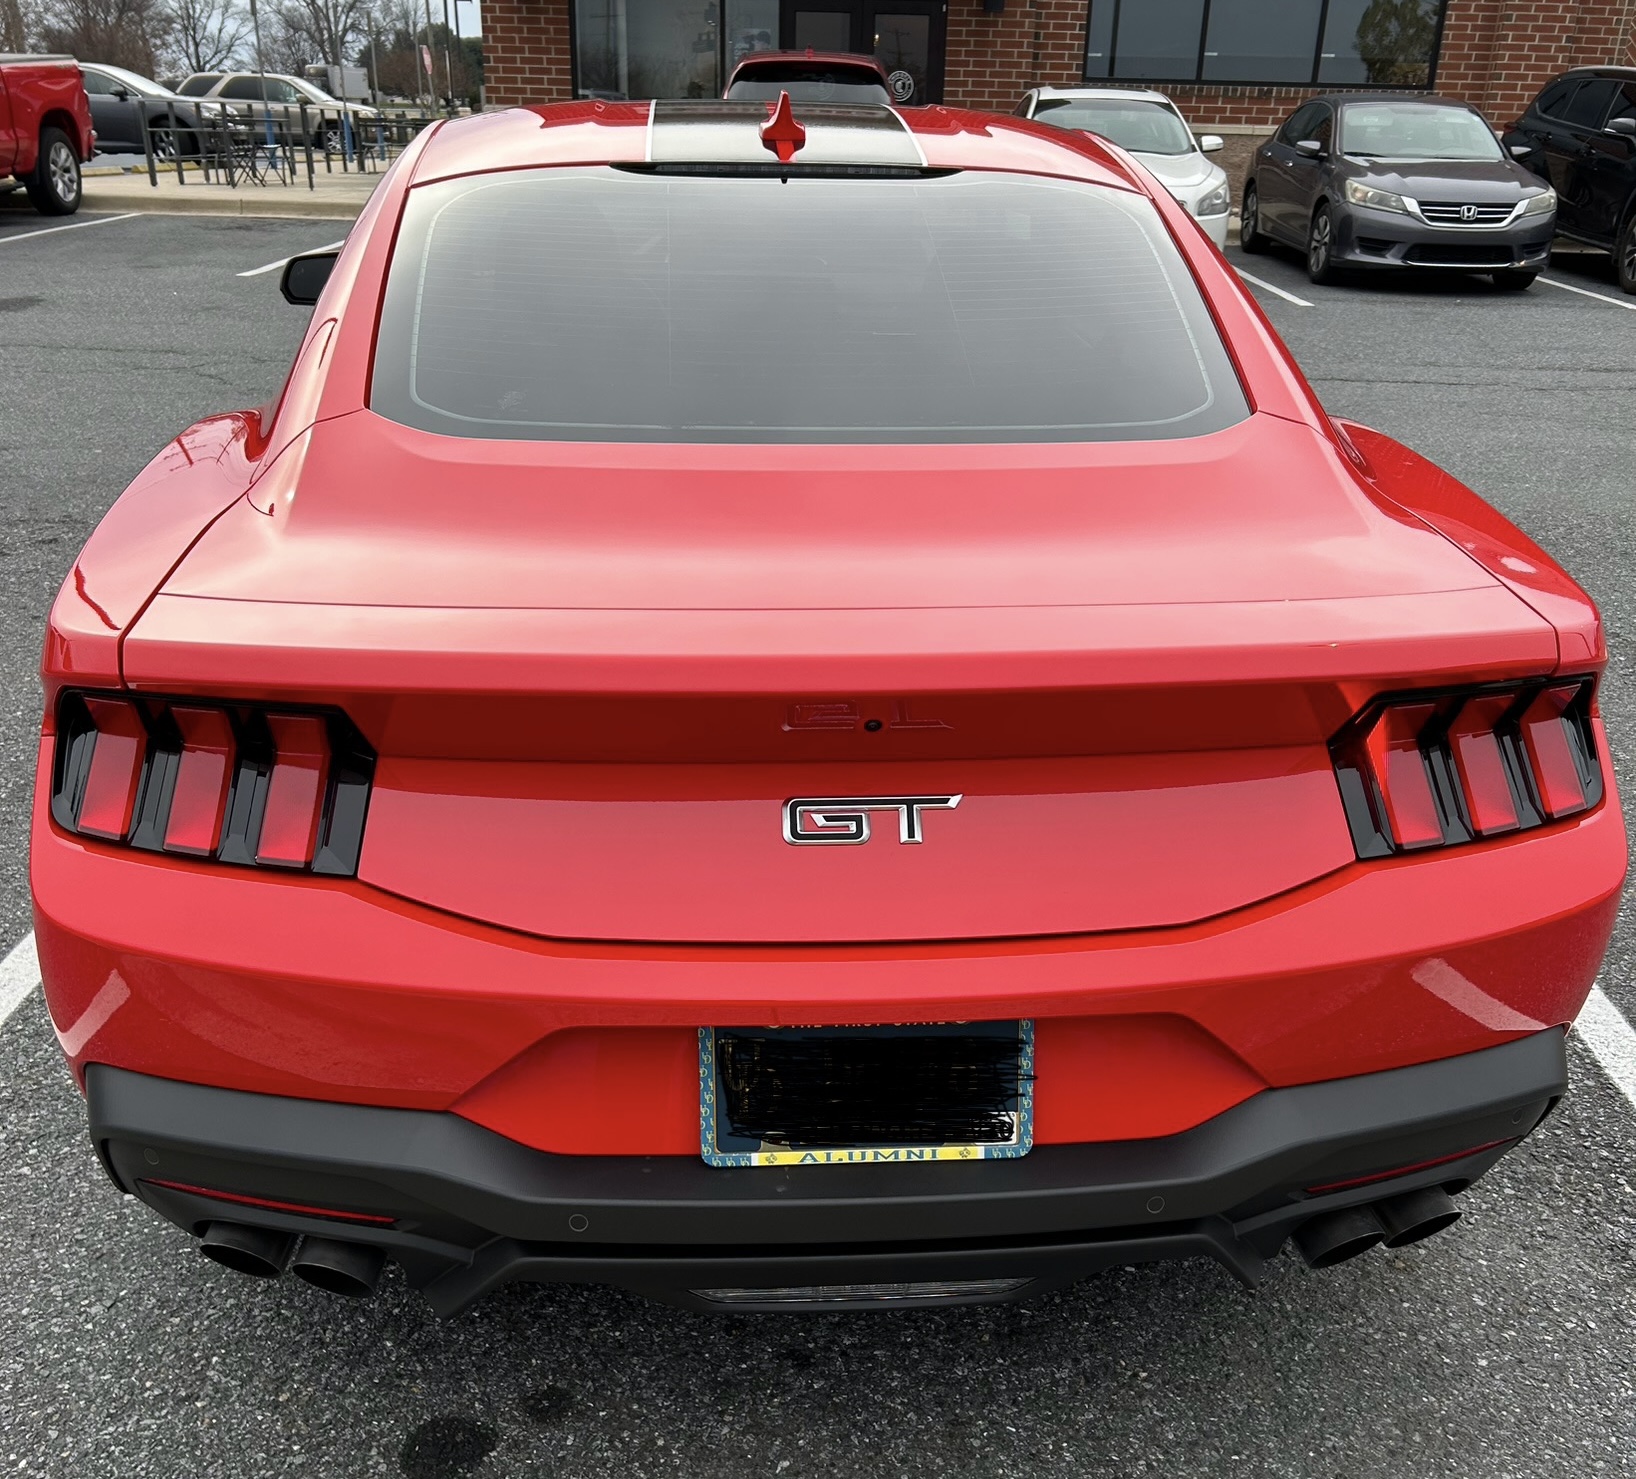 S650 Mustang 18% Ceramic Tint and gouge repaired IMG_3655